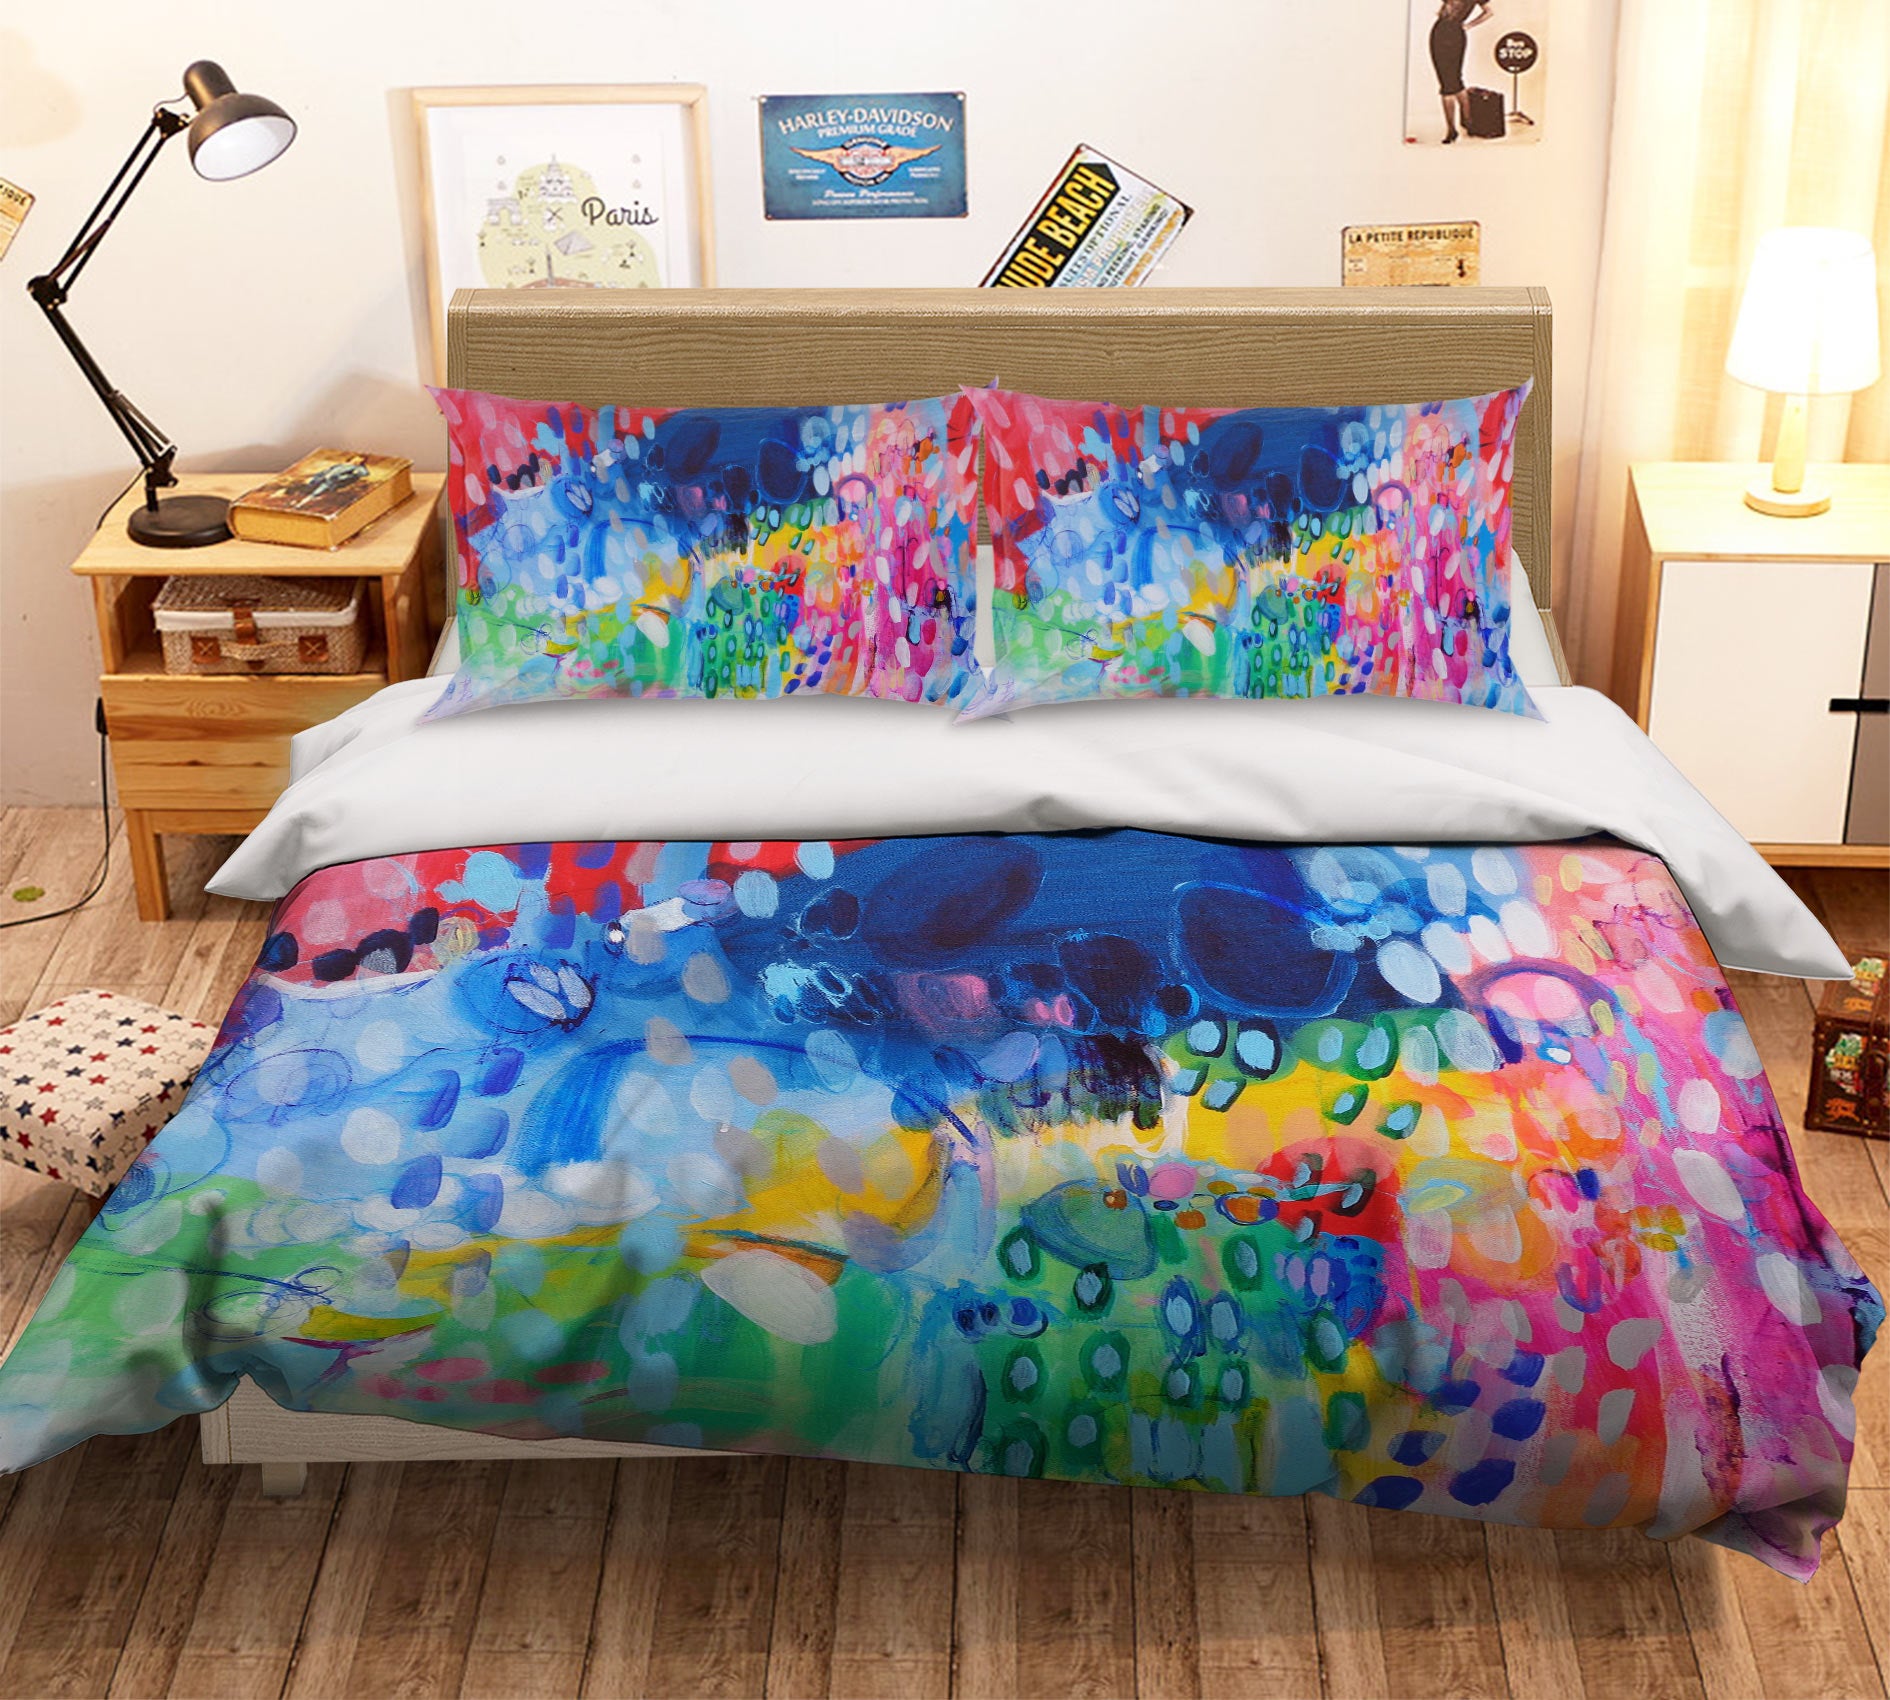 3D Color Painting 1238 Misako Chida Bedding Bed Pillowcases Quilt Cover Duvet Cover